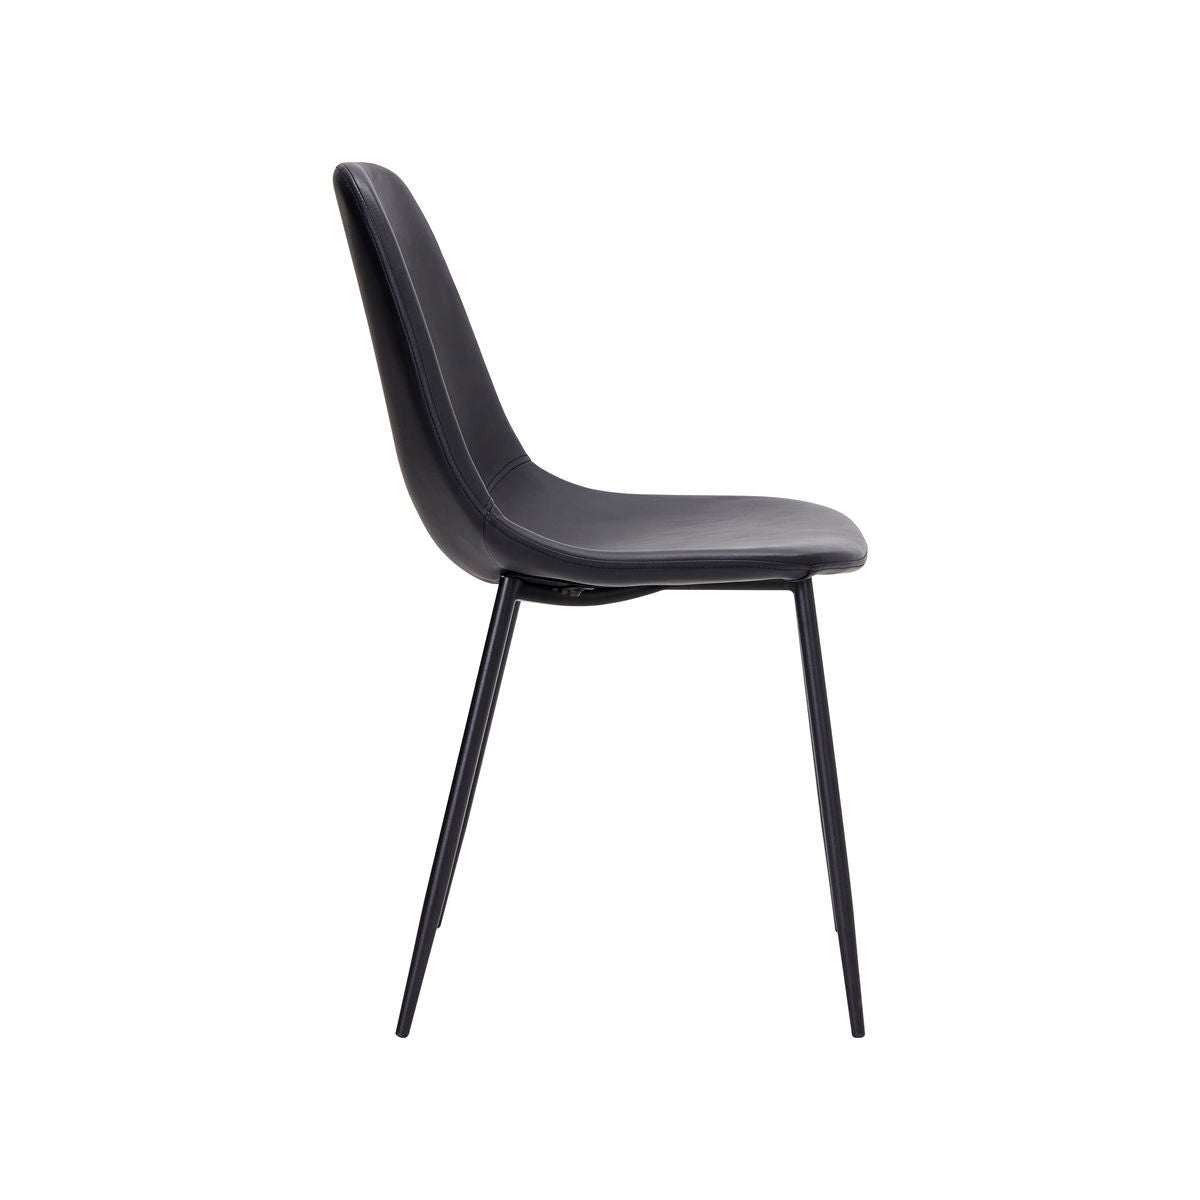 House Doctor Chair, Hdfound, Black